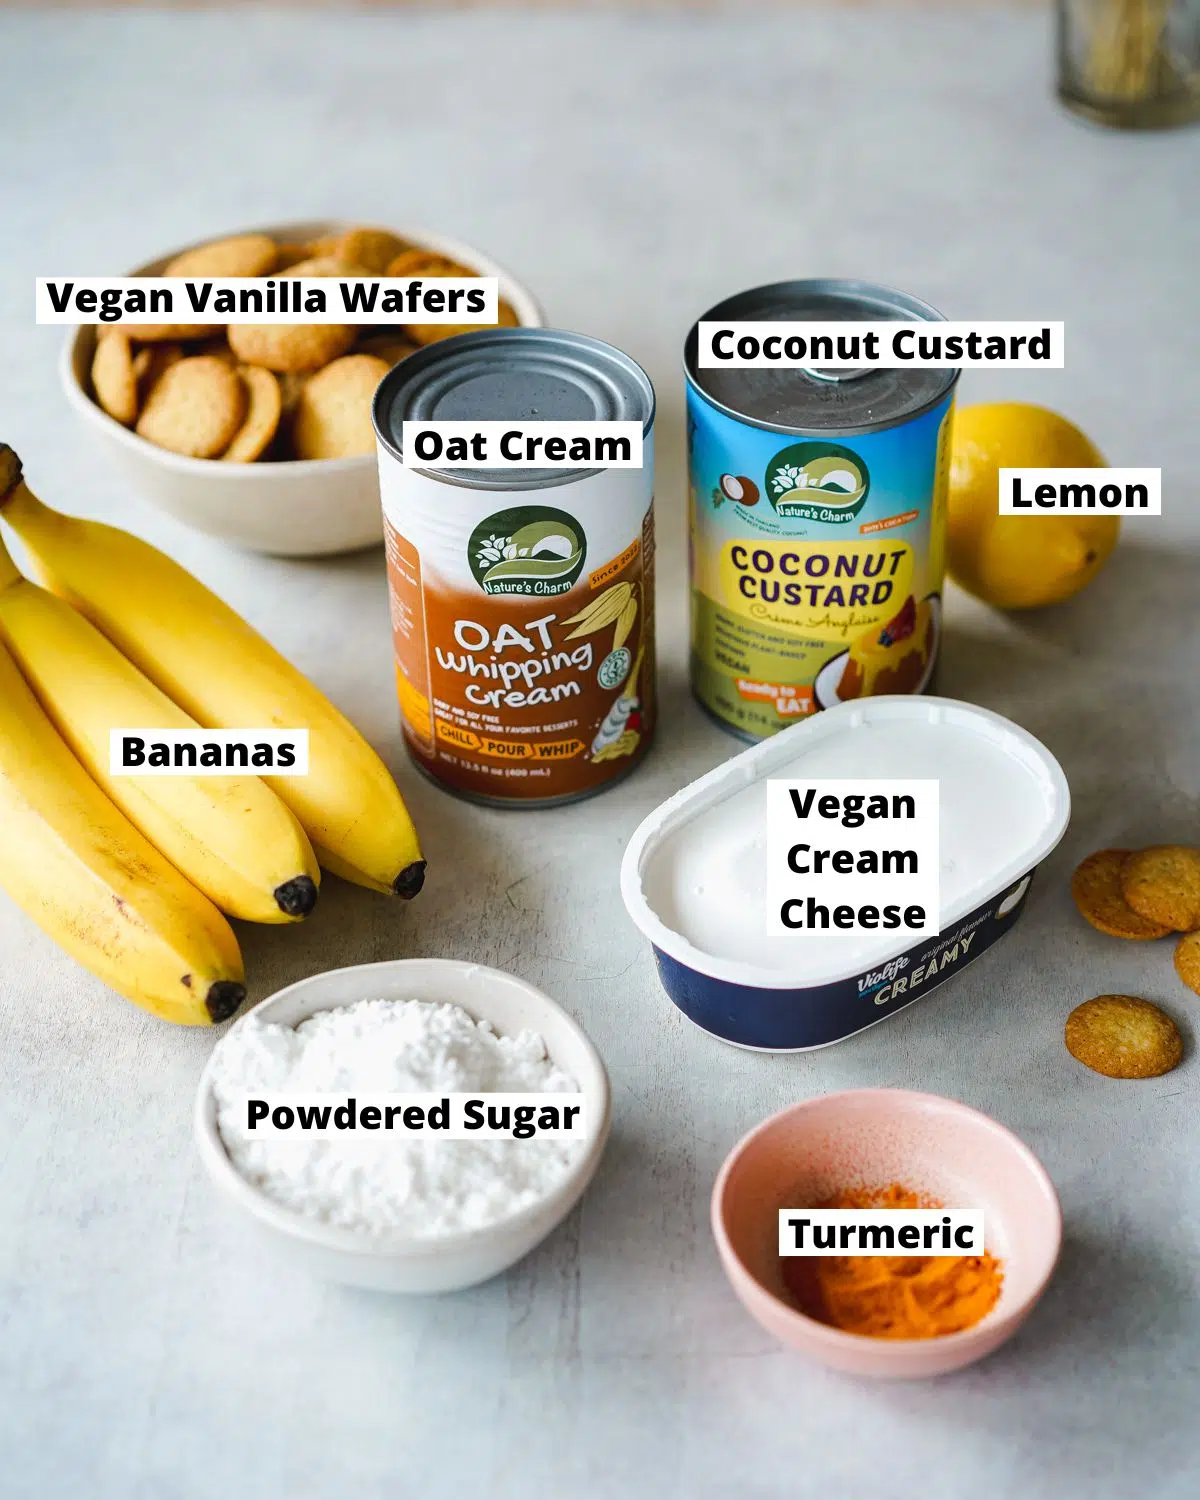 ingredients for vegan banana pudding measured out in bowls.